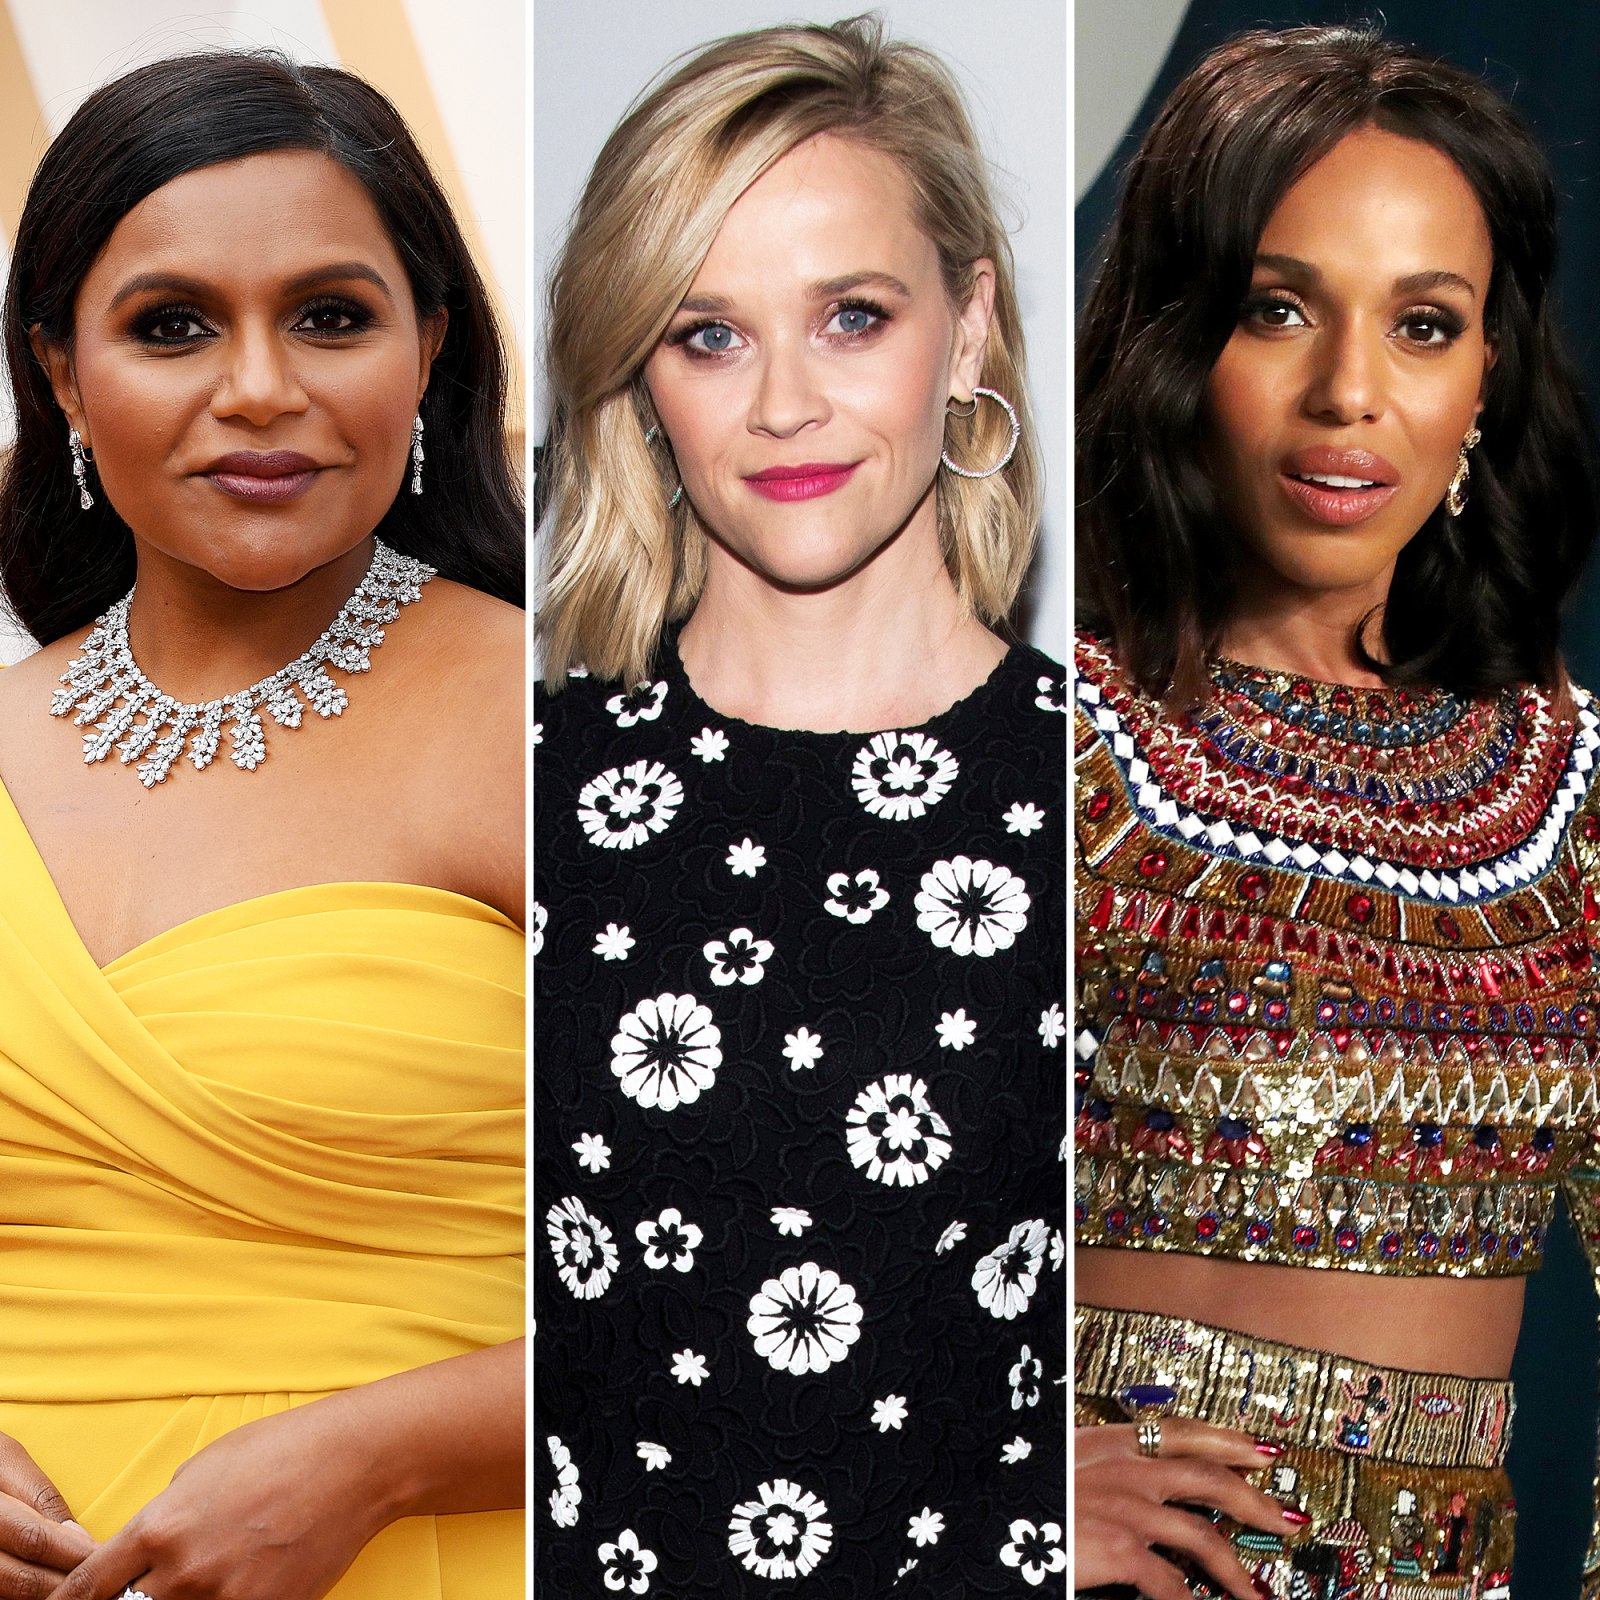 Mindy Kaling Goes to Reese Witherspoon, Kerry Washington for Parenting Tips